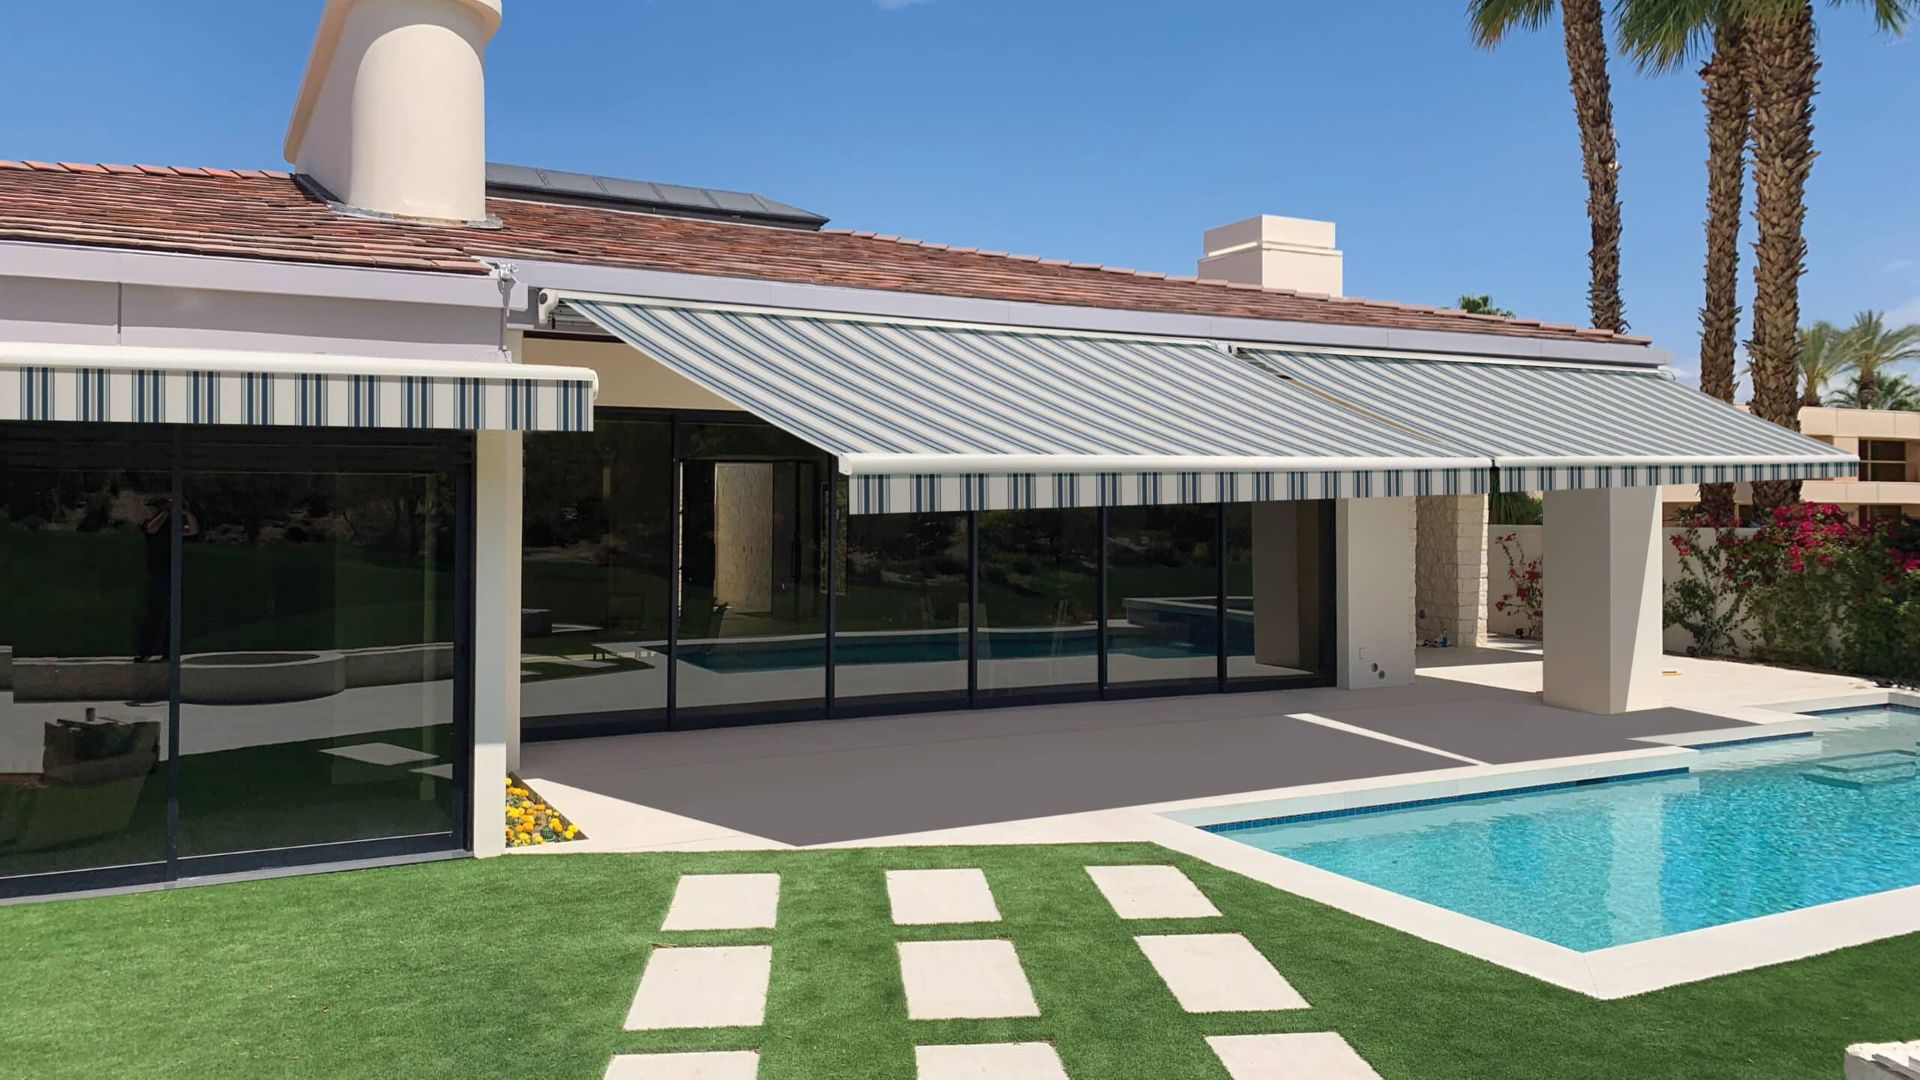 Is It Hard to Maintain a Retractable Awning?